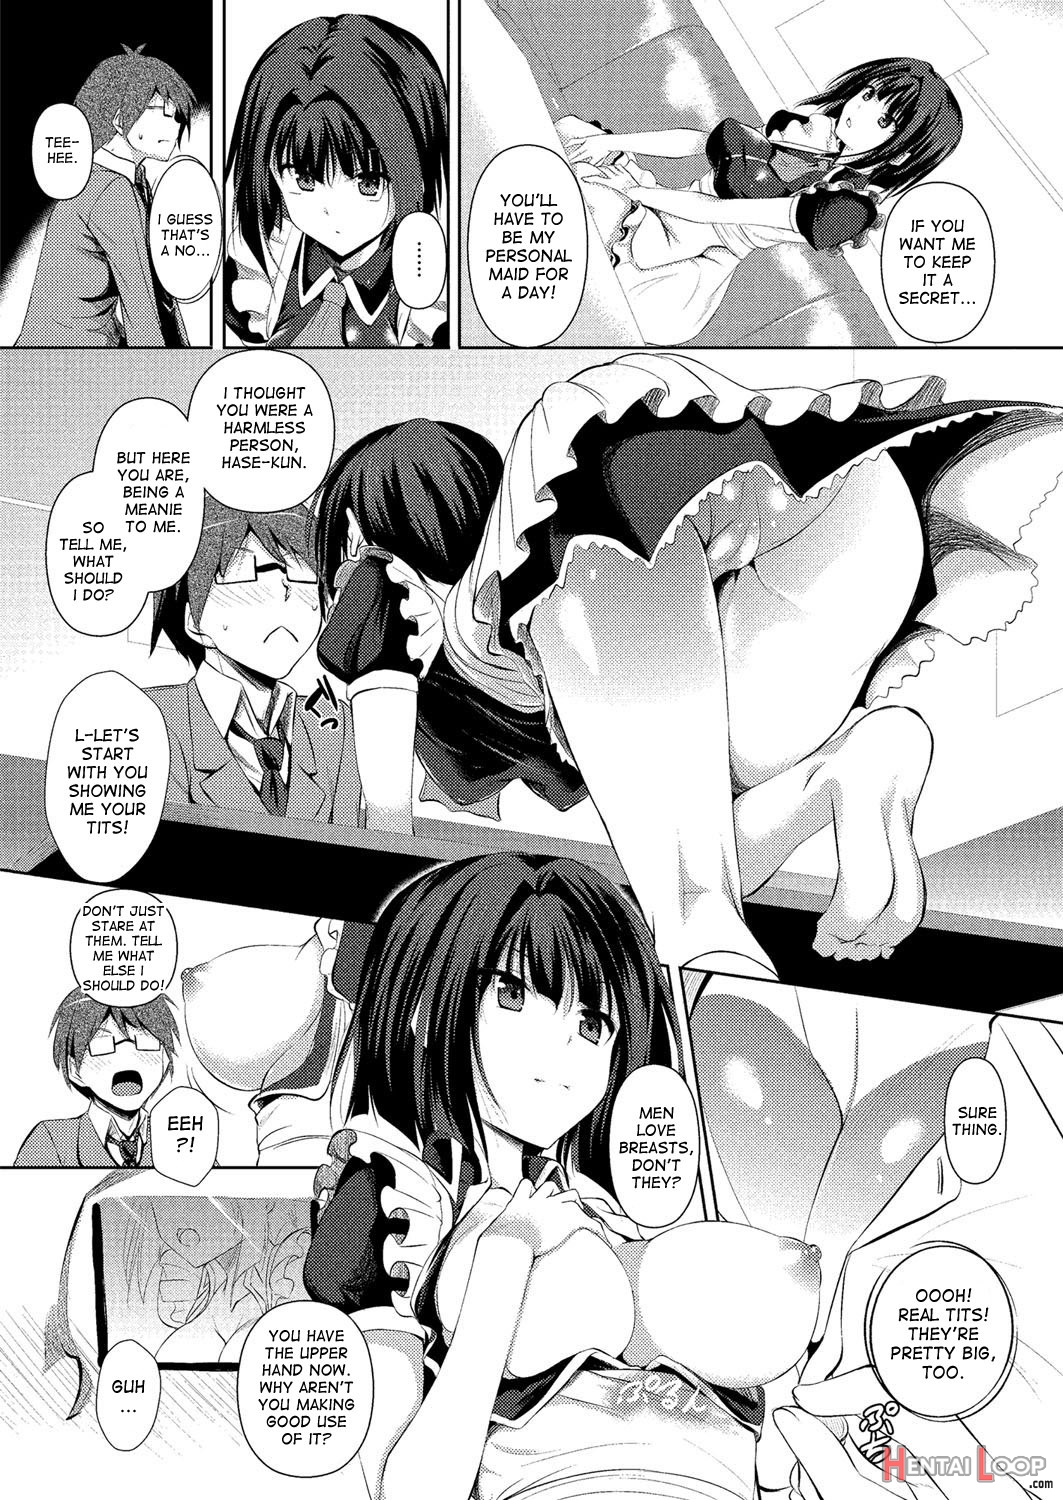 Reserved Maid page 7